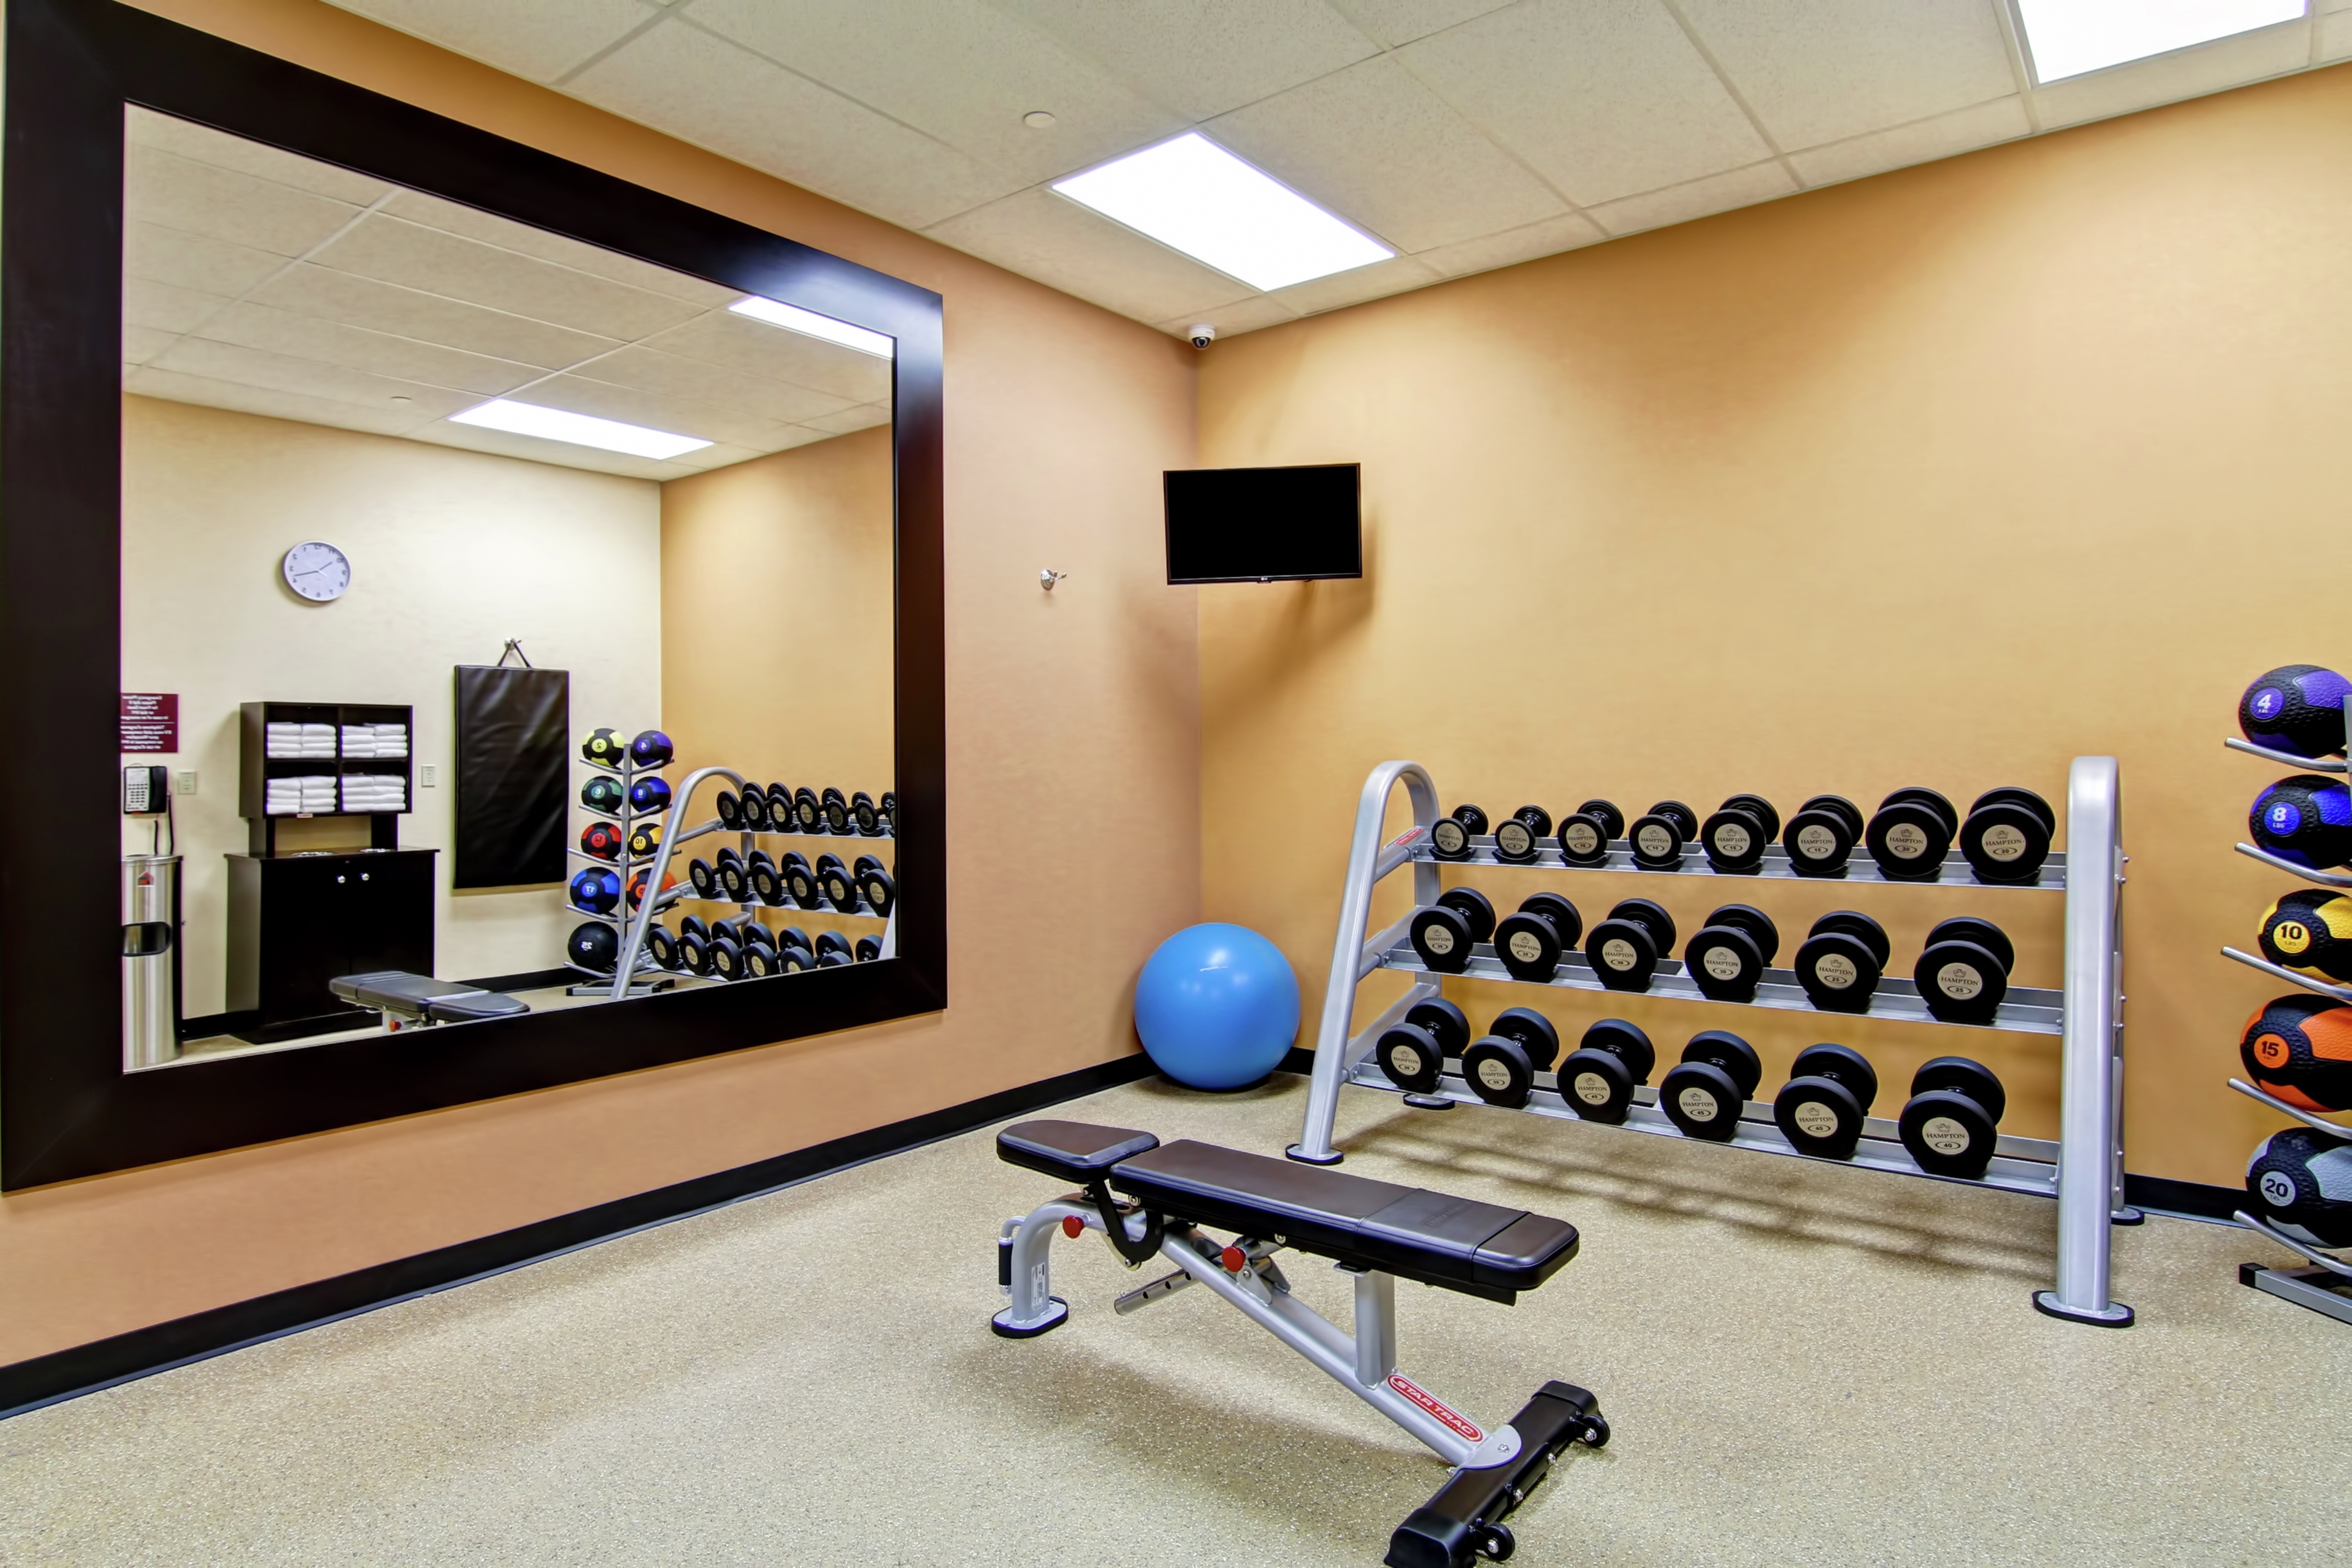 Lower Level Fitness Room With Water Cooler and Towel Station Reflected in Large Wall Mirror, TV, Weight Bench, Blue Stability Ball, Free Weights, and Weight Balls